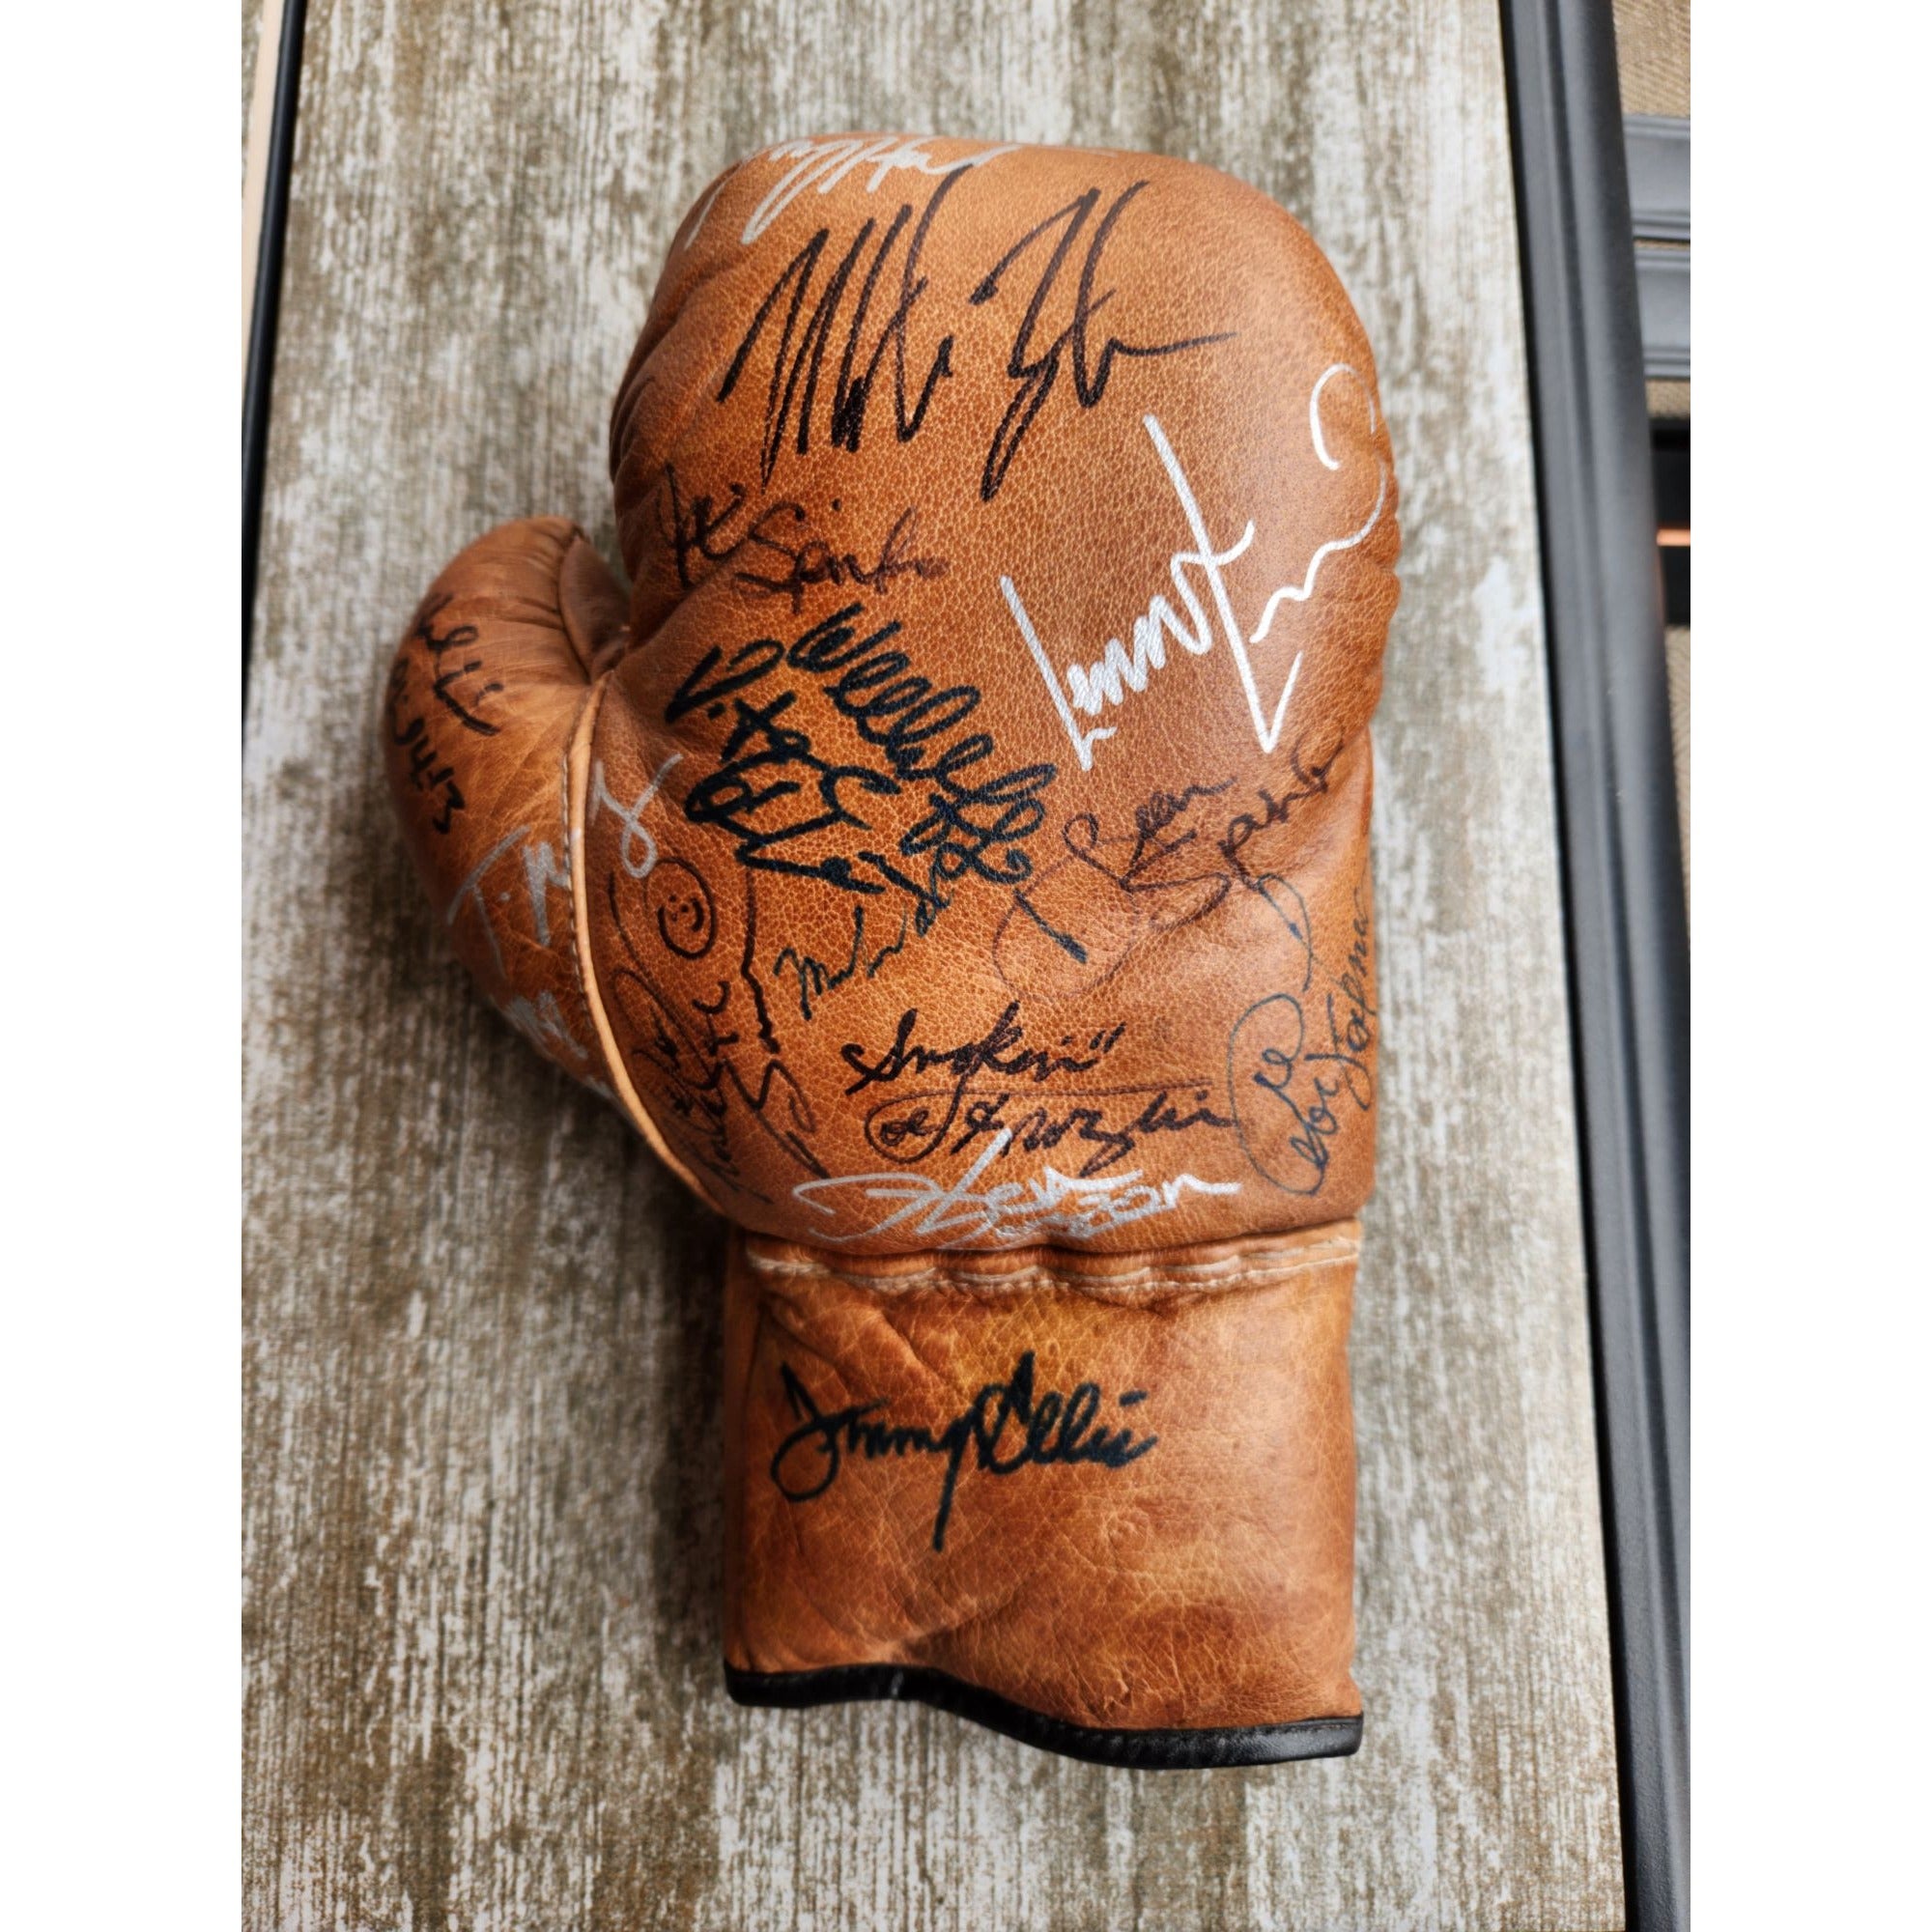 Mike Tyson Signed Mini Boxing Gloves